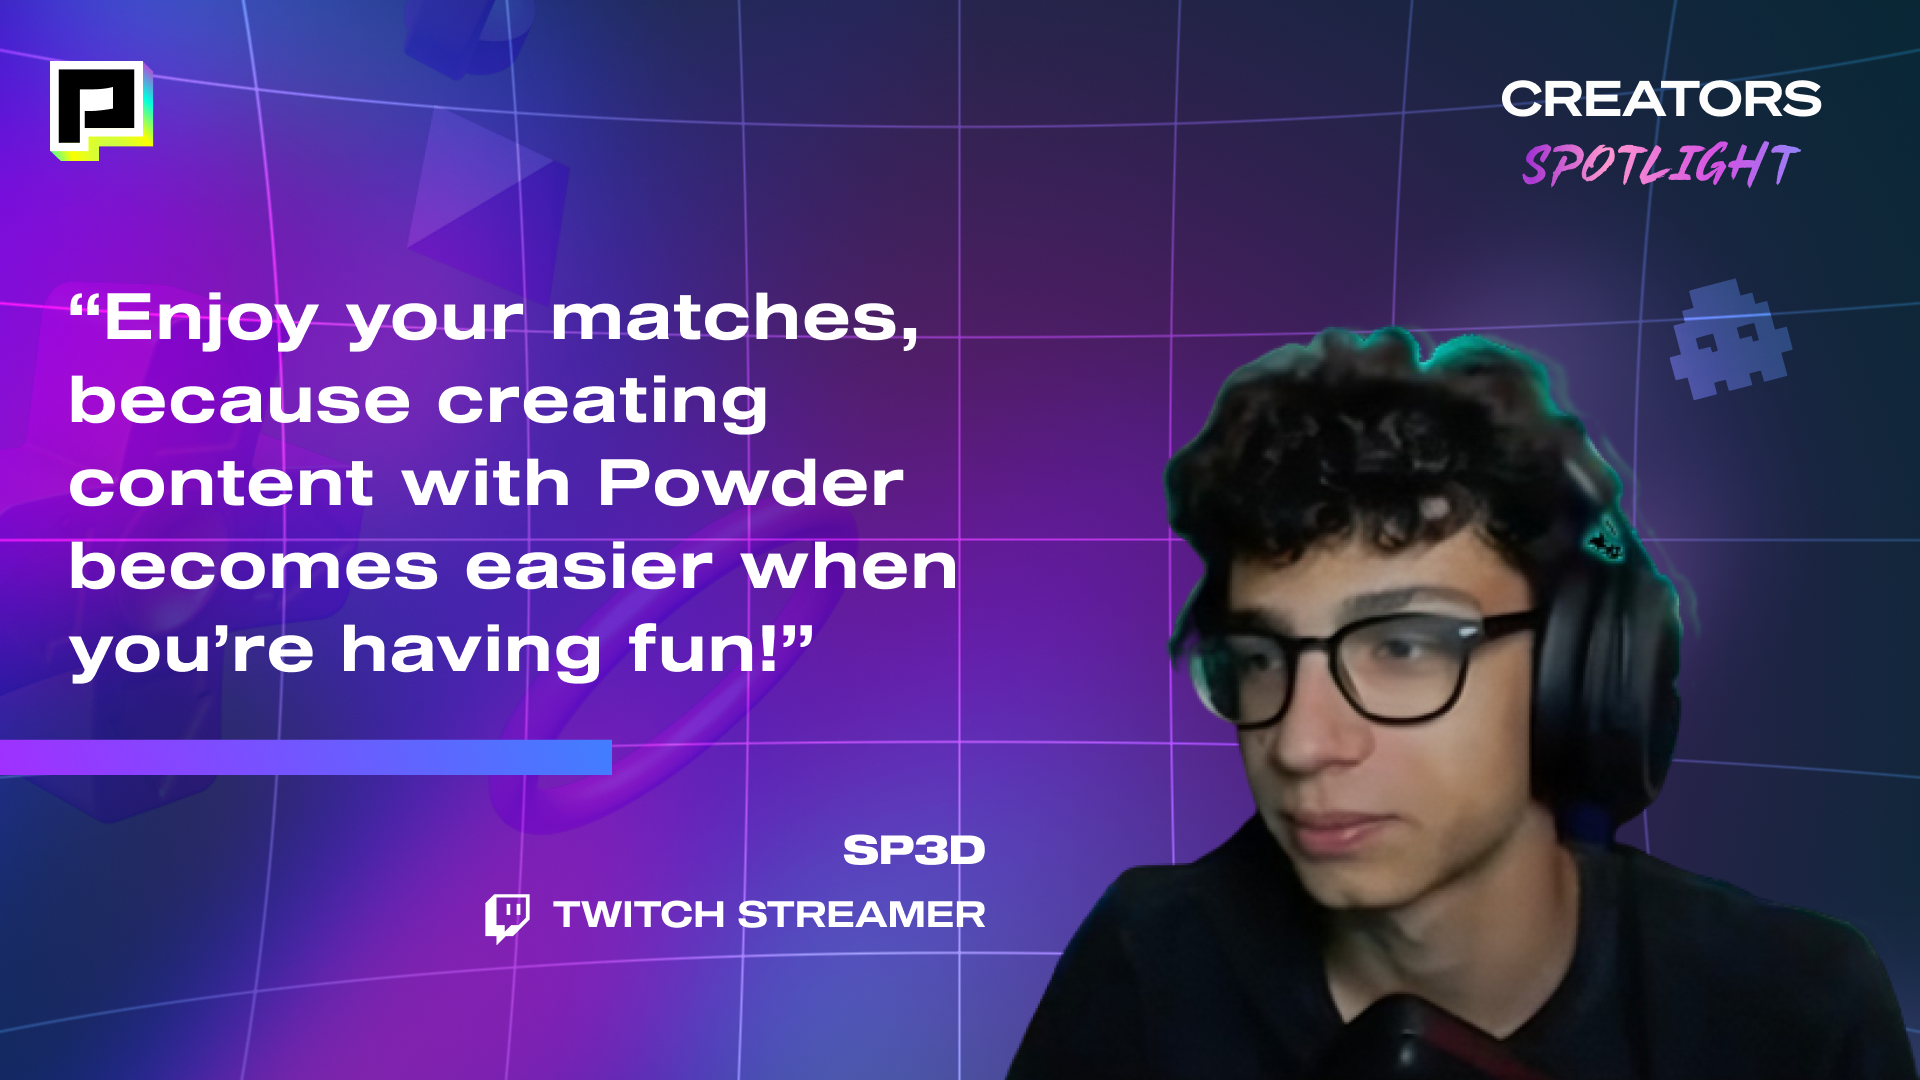 Image of Twitch Streamer, SP3D with his quote, "Enjoy your matches, because creating content with Powder becomes easier when you're having fun!"